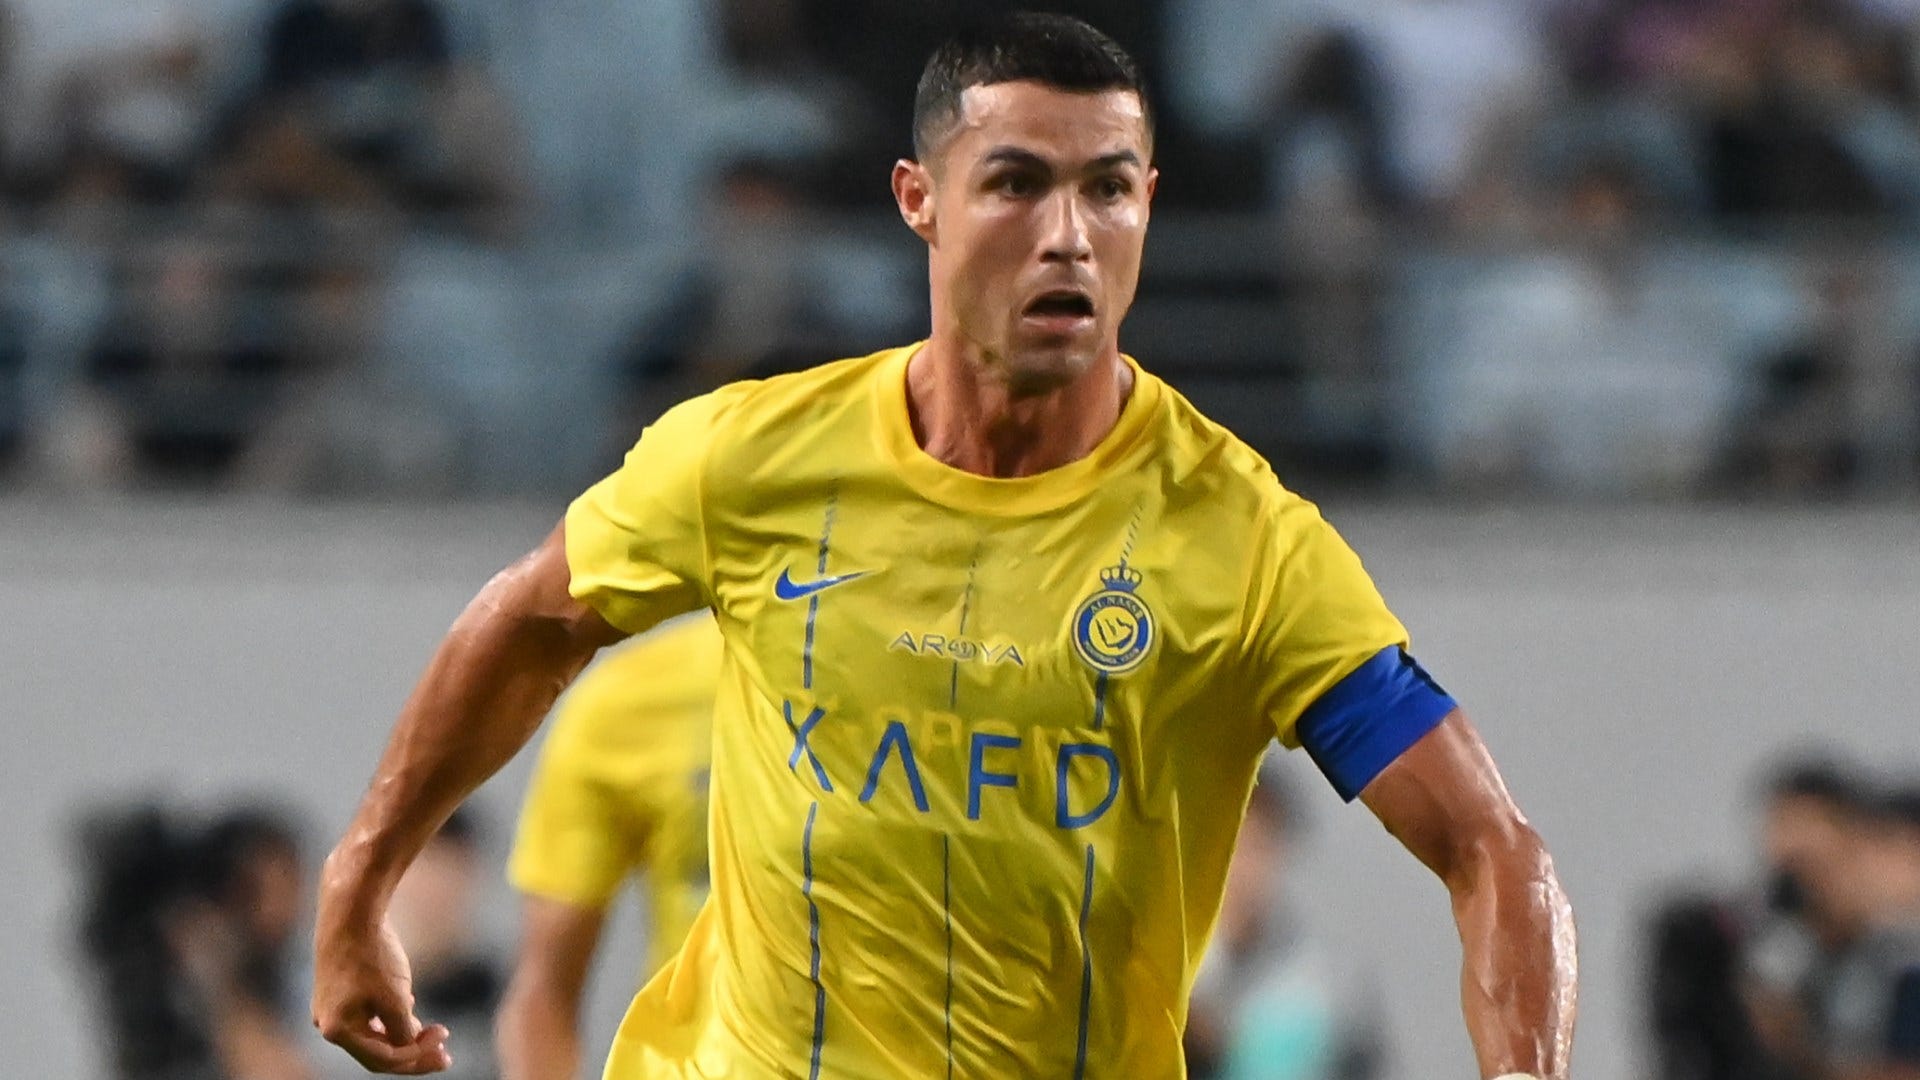 WATCH CR7 is on fire! Cristiano Ronaldo produces fierce side-foot finish to help Al-Nassr book spot in Arab Club Champions Cup semi-finals Goal UK